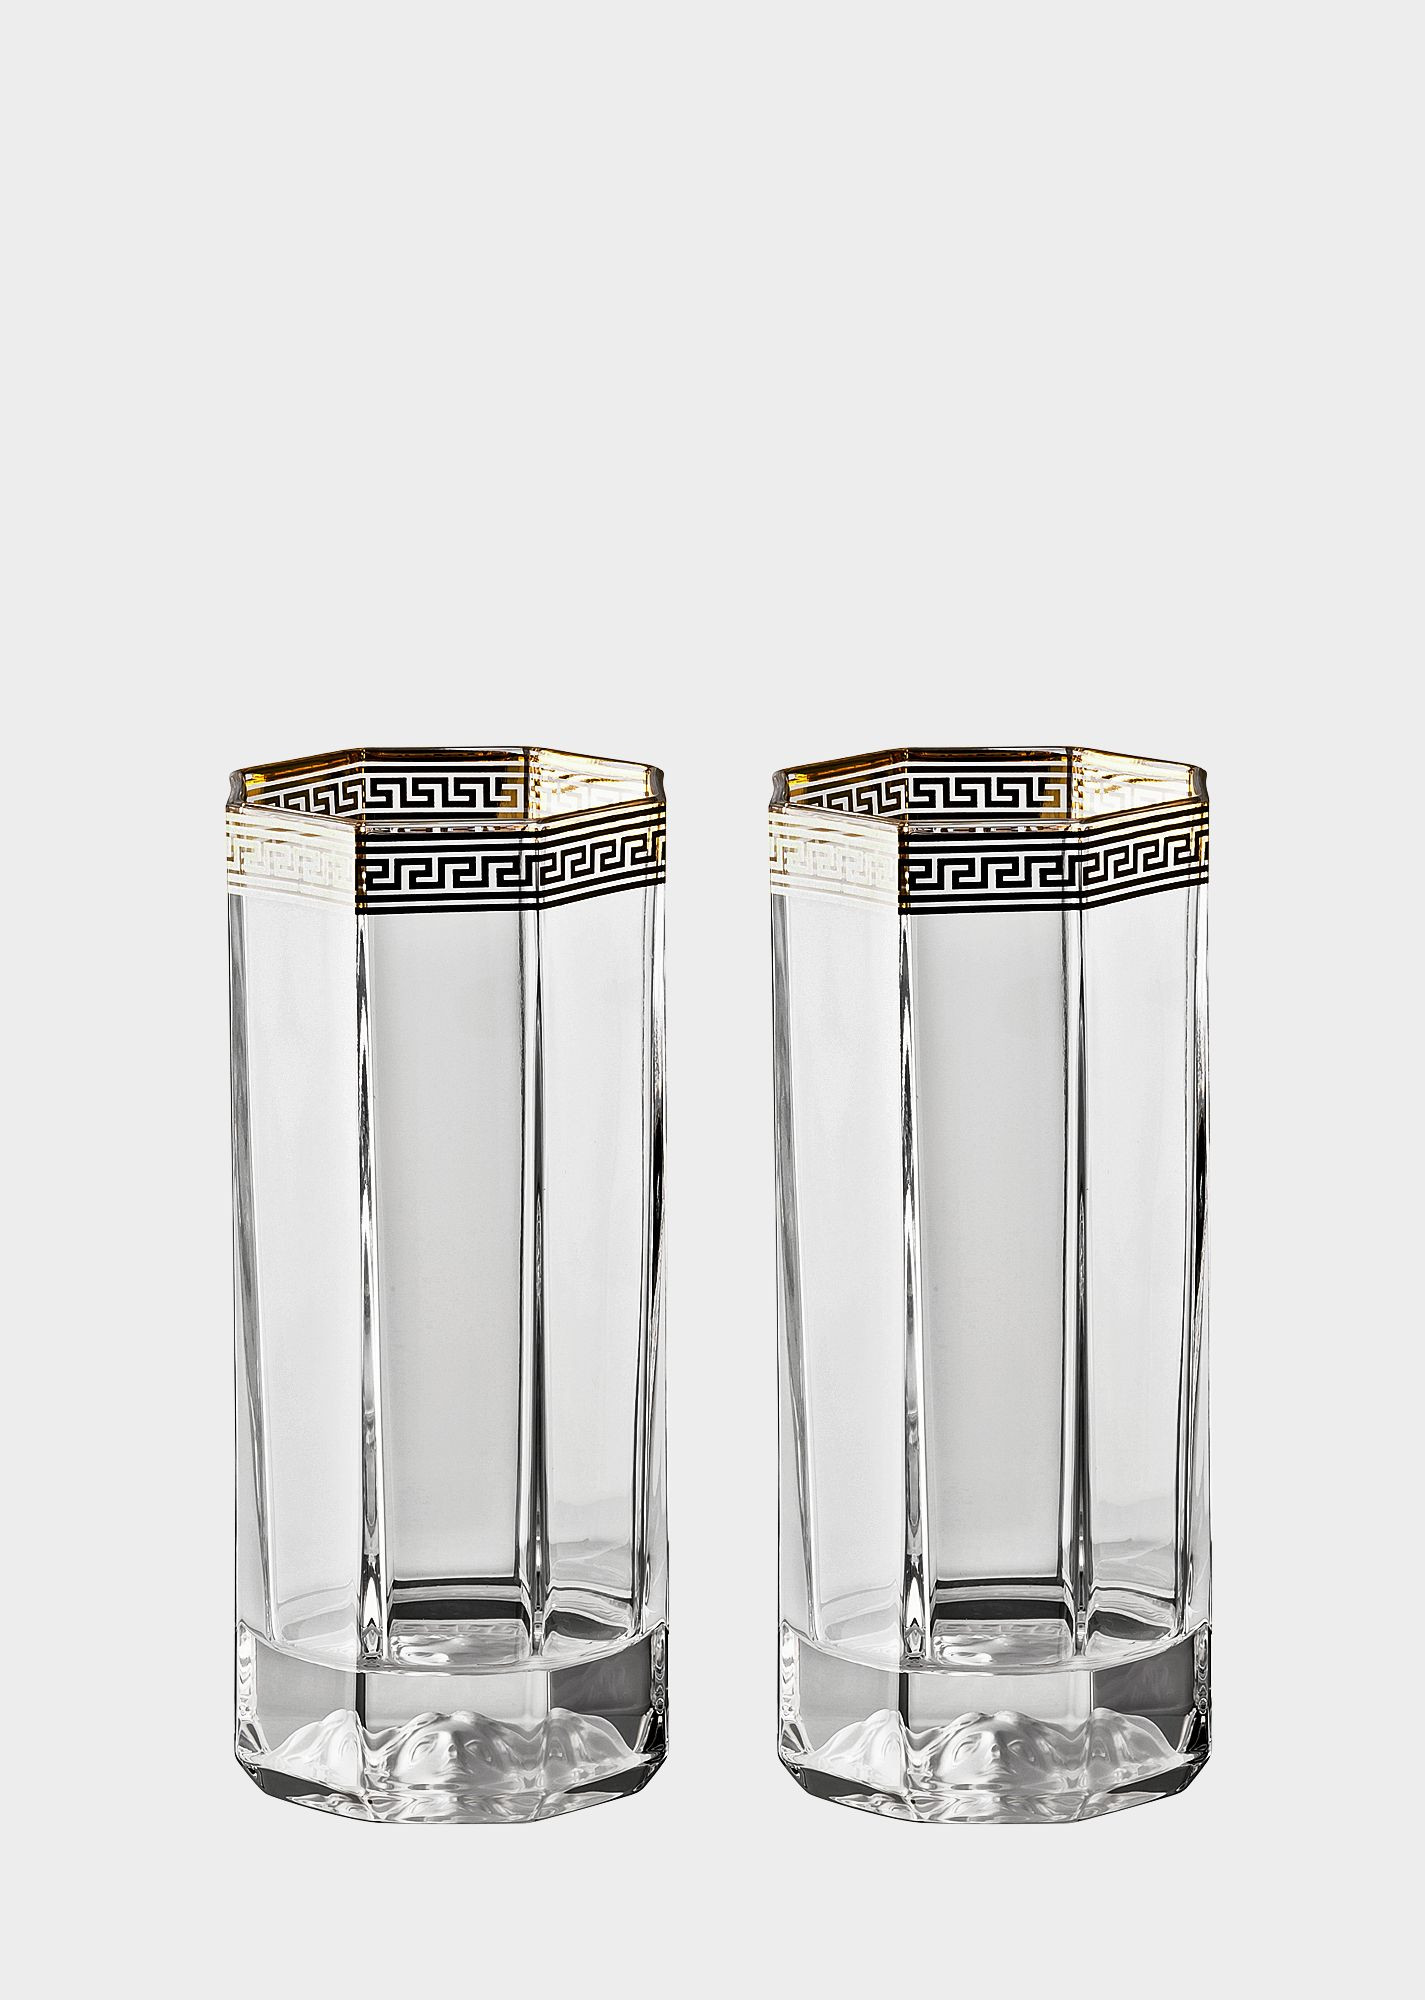 10 Unique Champagne Flutes with Vase Holder 2024 free download champagne flutes with vase holder of 21 crystal glass vase the weekly world within versace home luxury glass crystal